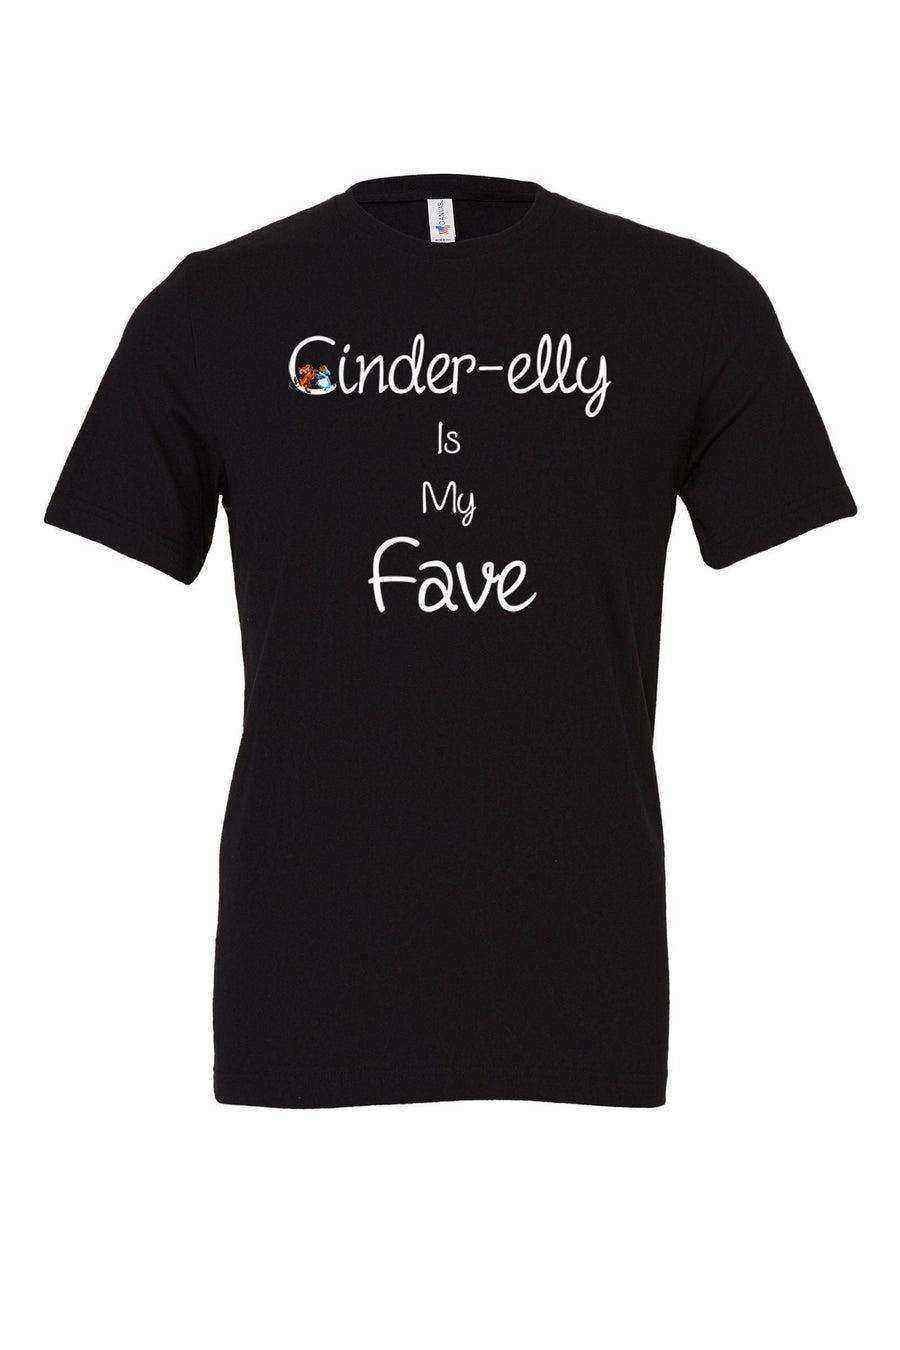 Toddler | Cinder-elly is my Fave Shirt - Dylan's Tees